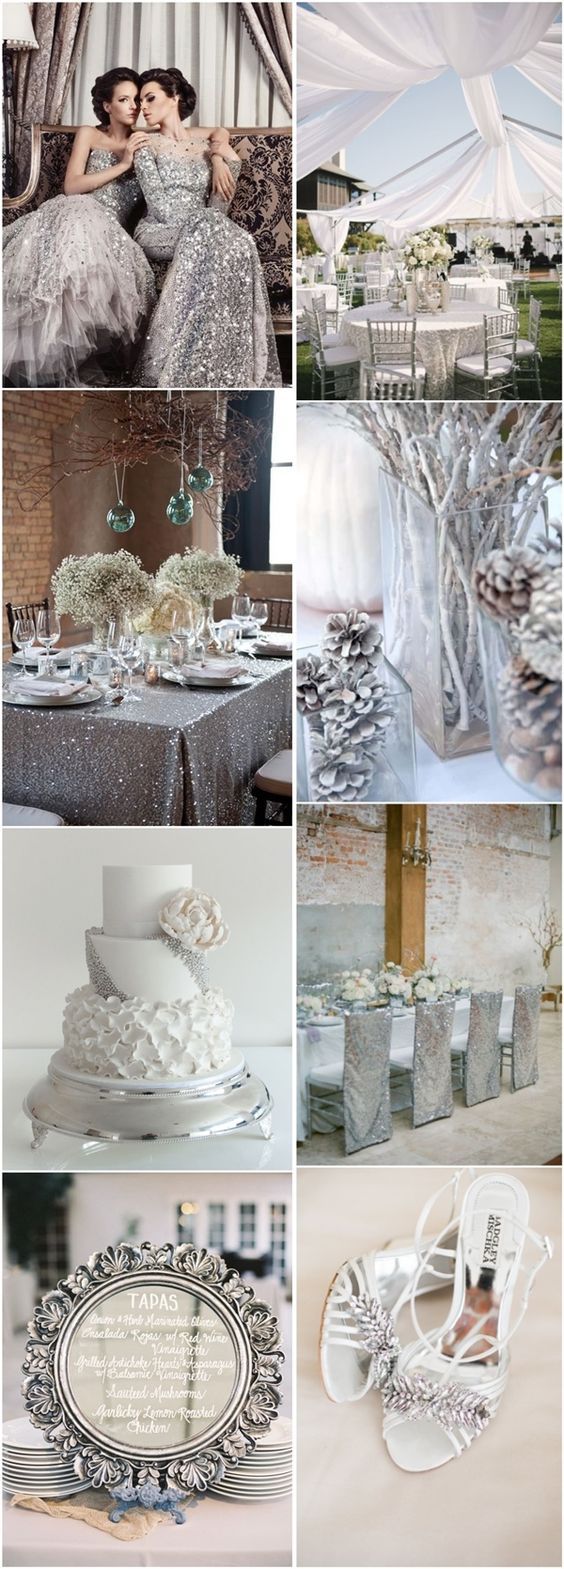 b7dfba59c8a6fda8120bb4db7d417986 Trend Forecasting: Top 15 Expected Wedding Color Ideas - 16